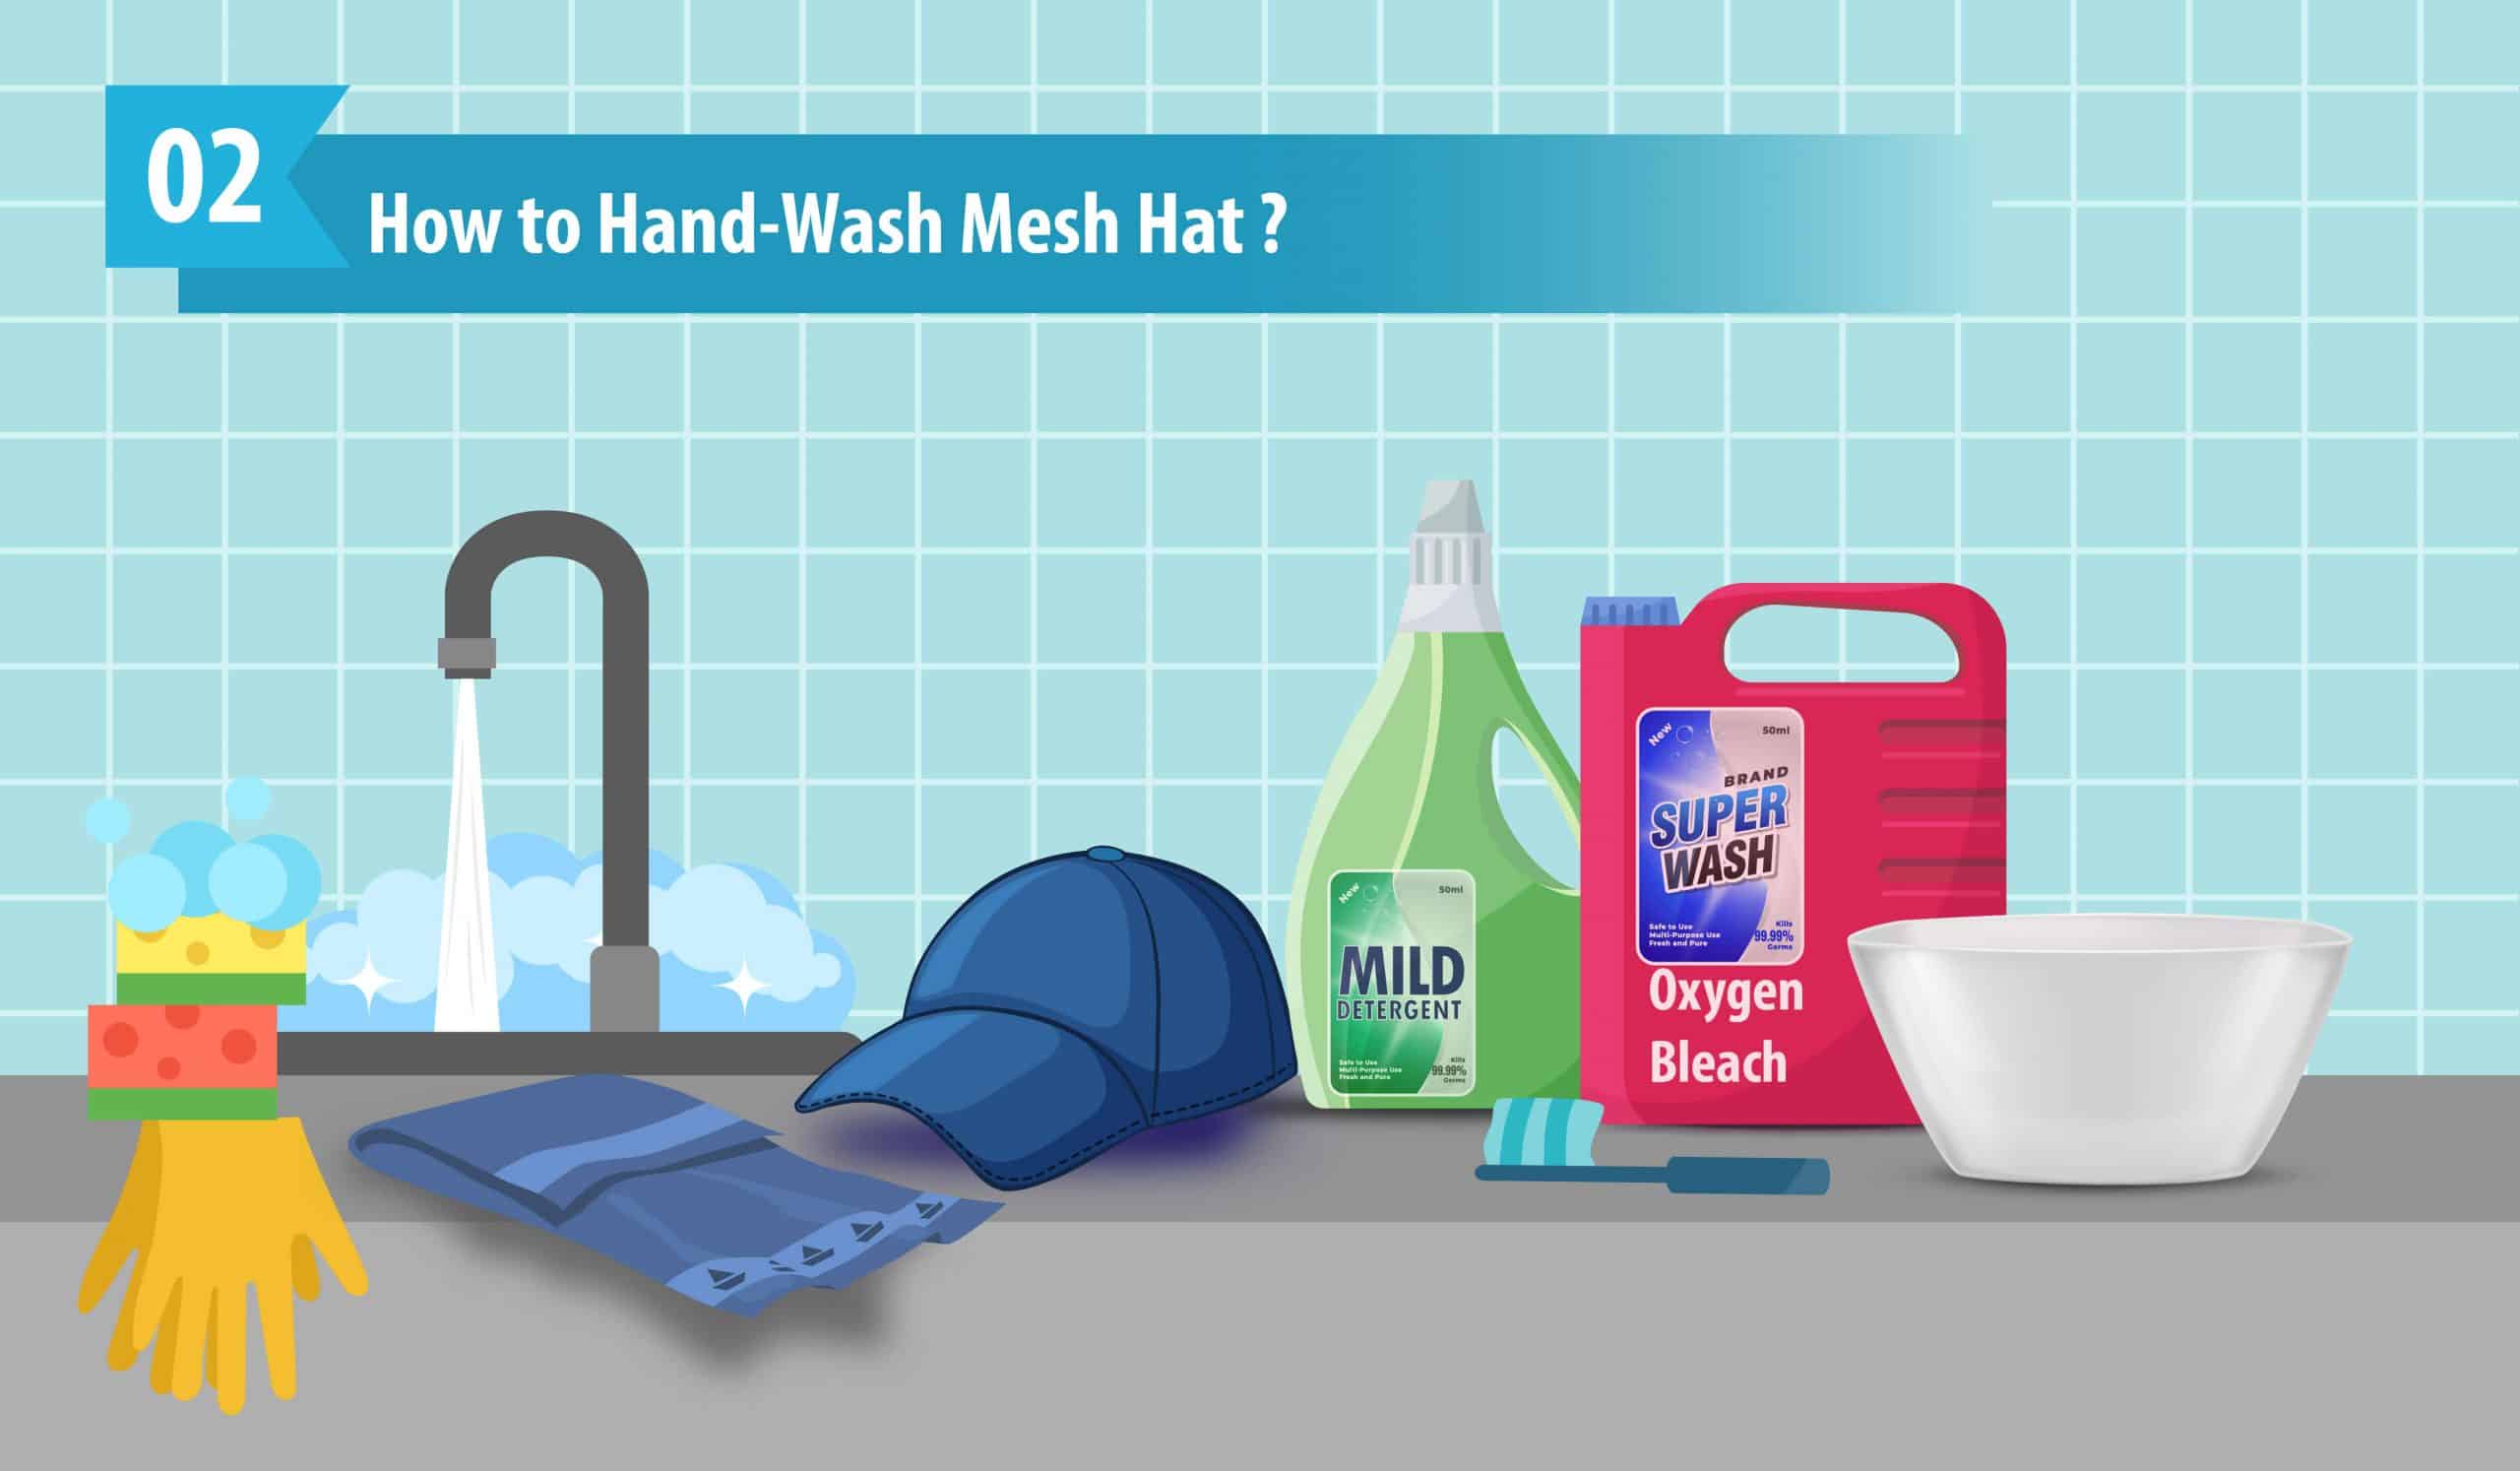 How to Hand-Wash Mesh Hat